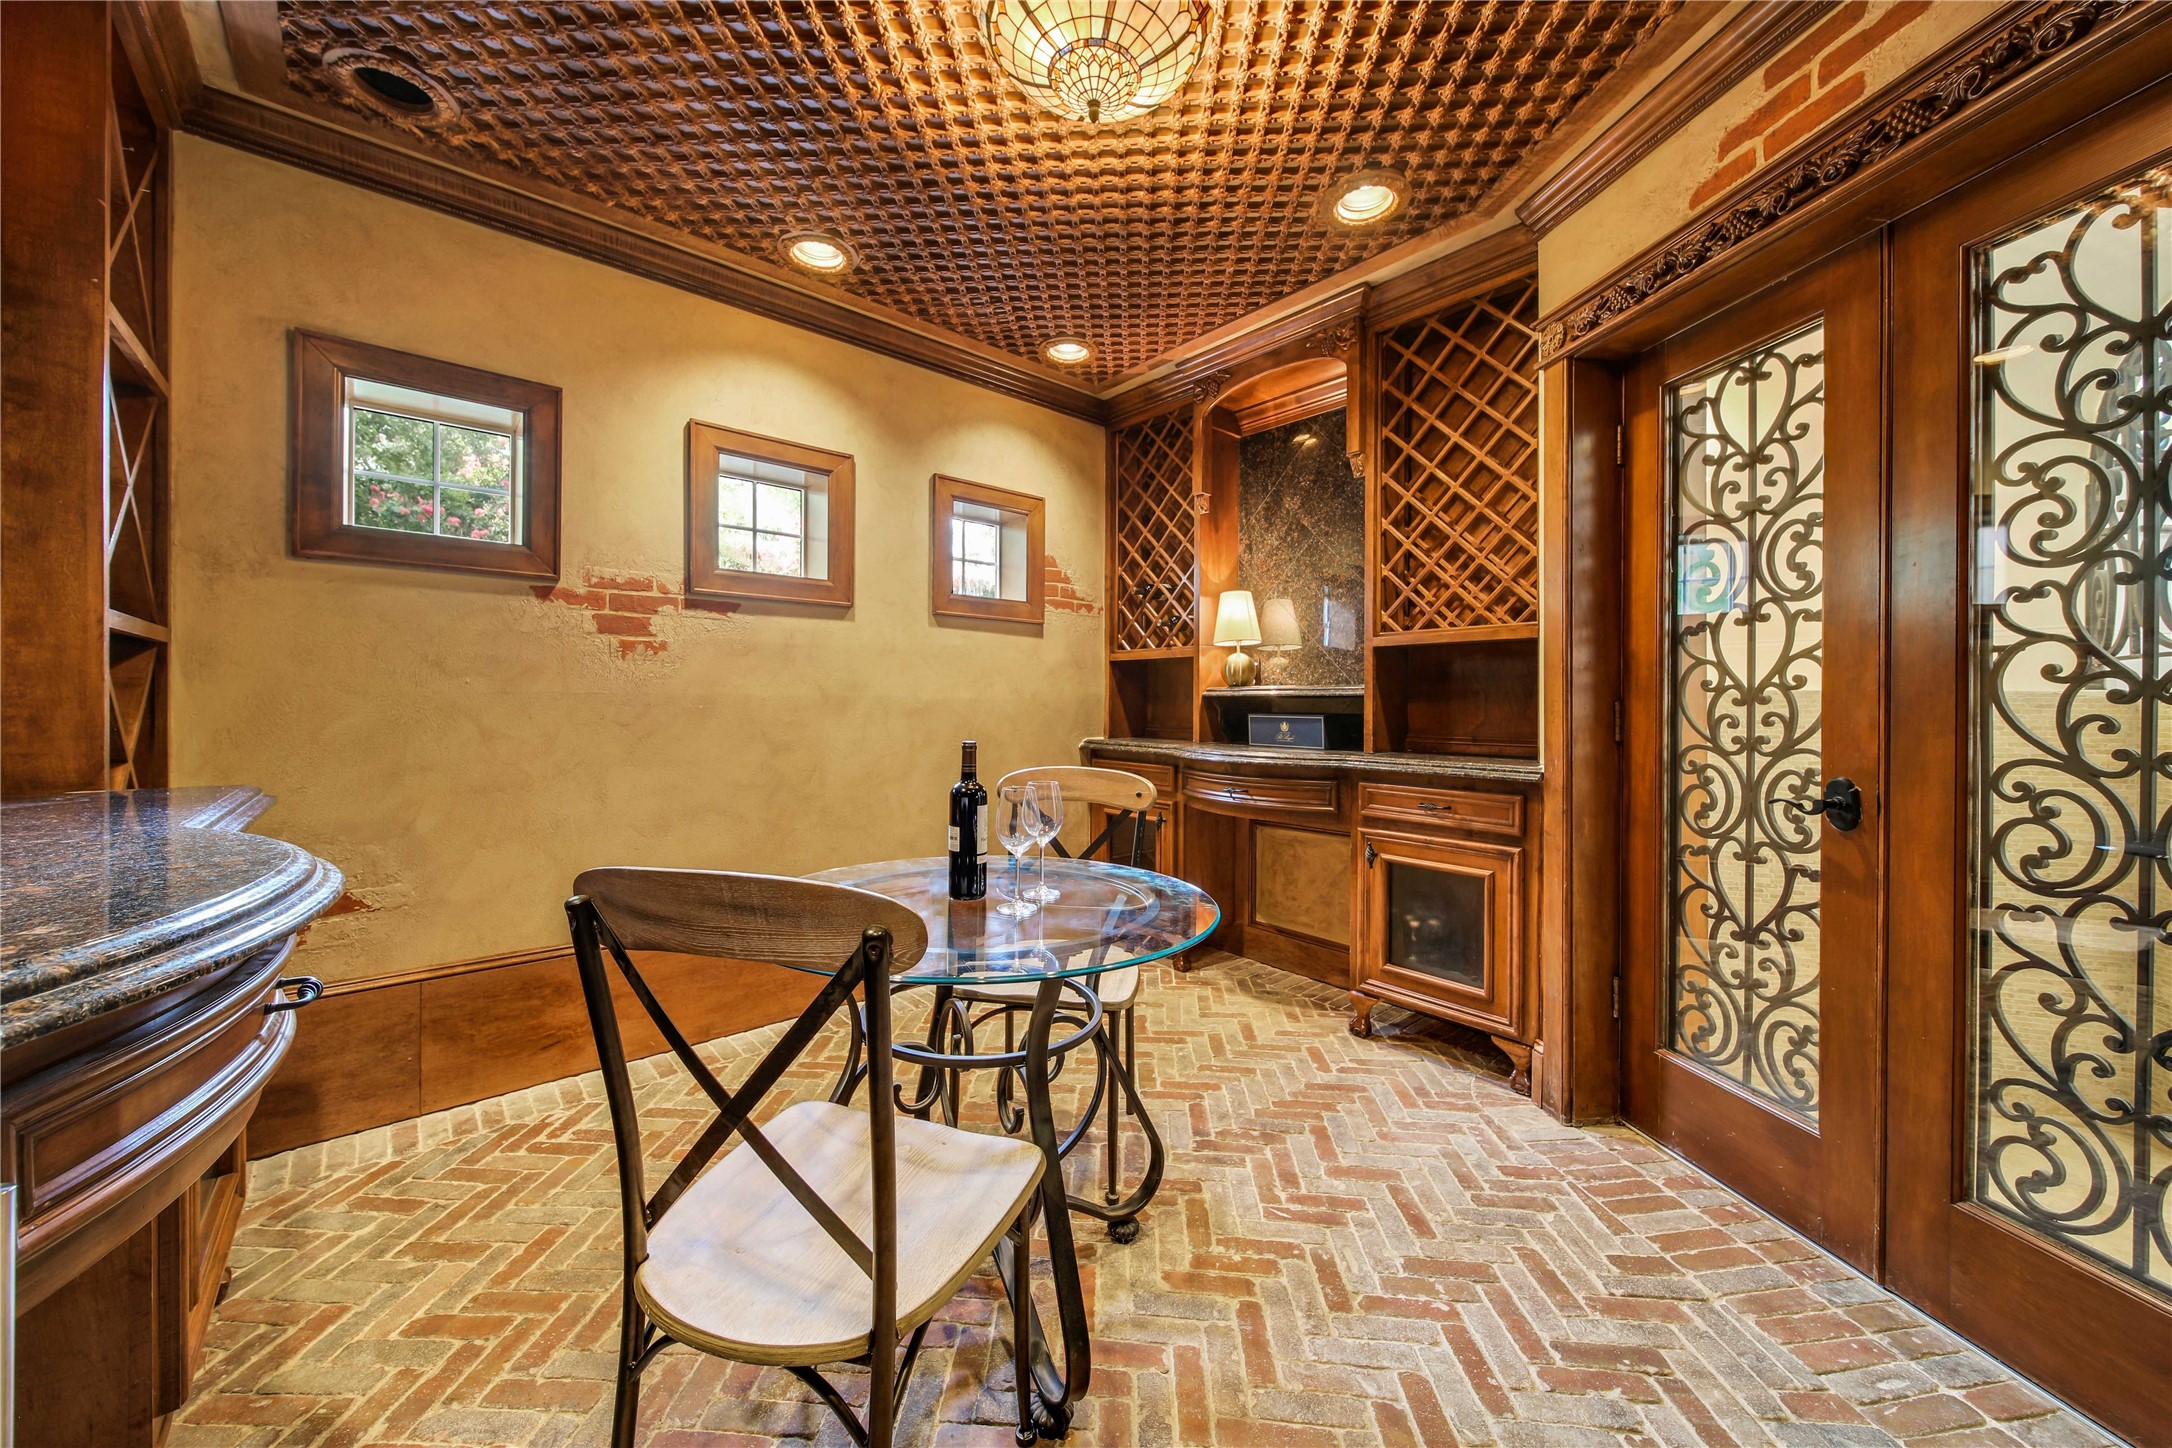 Whether you are a wine enthusiast, a collector, or simply enjoy the occasional bottle of wine, having a climate-controlled wine cellar offers a convenient and stylish way to store and display your collection. It adds an element of sophistication to the property, reflecting the luxurious nature of the home.

